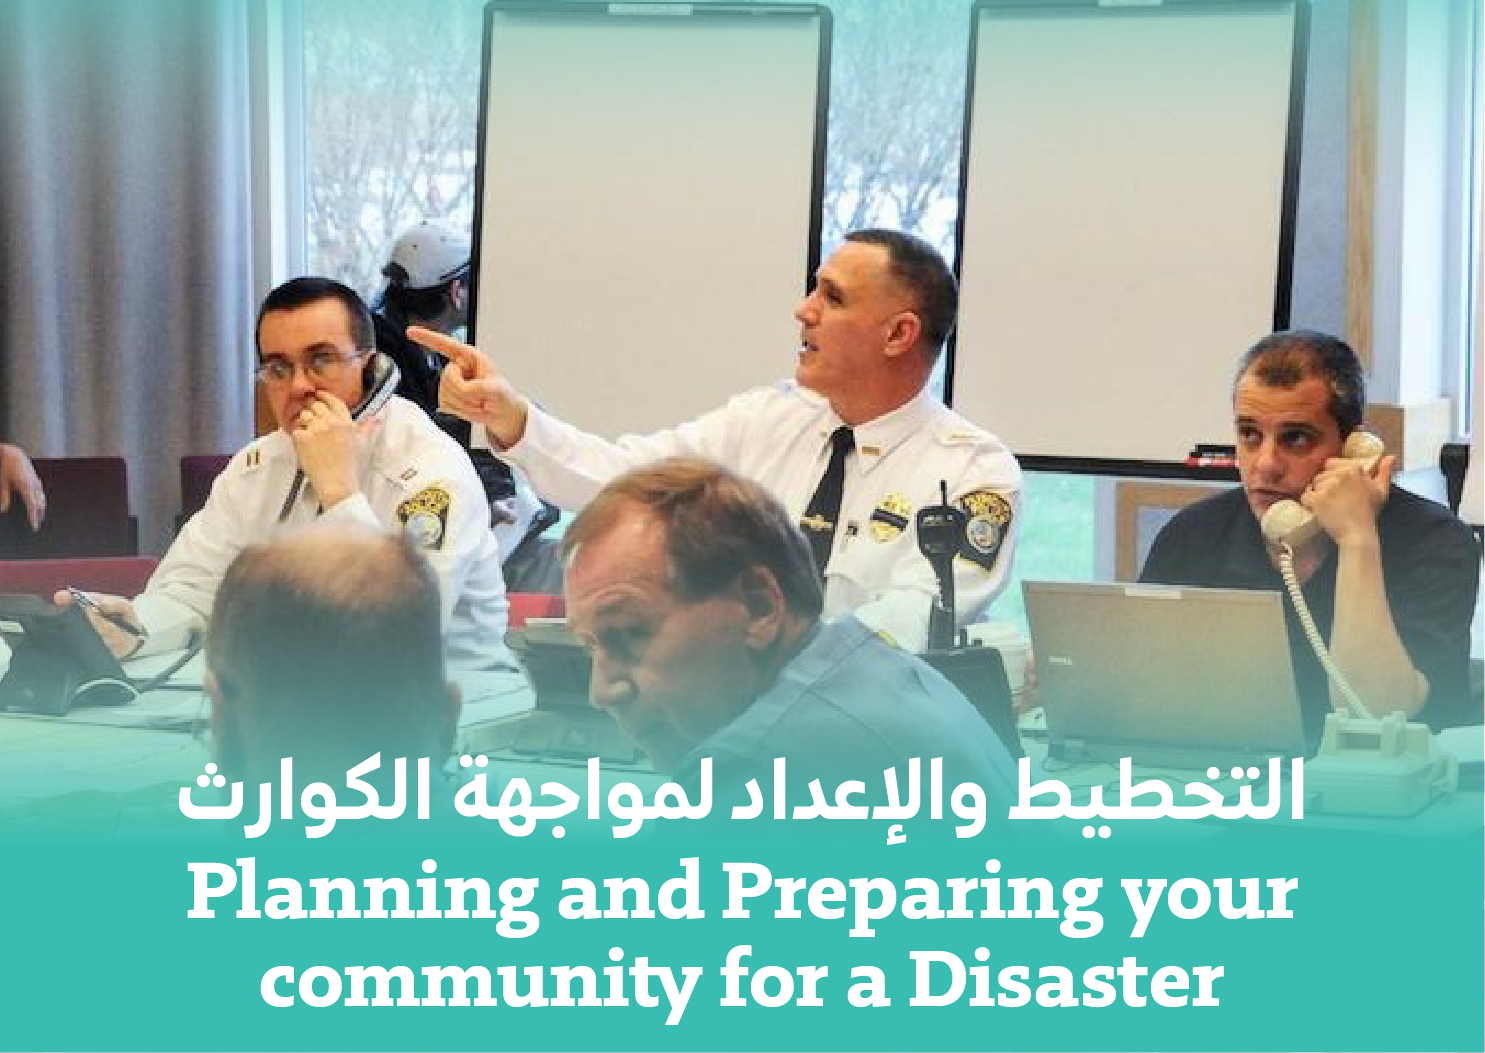  Planning and Preparing your community for a Disaster